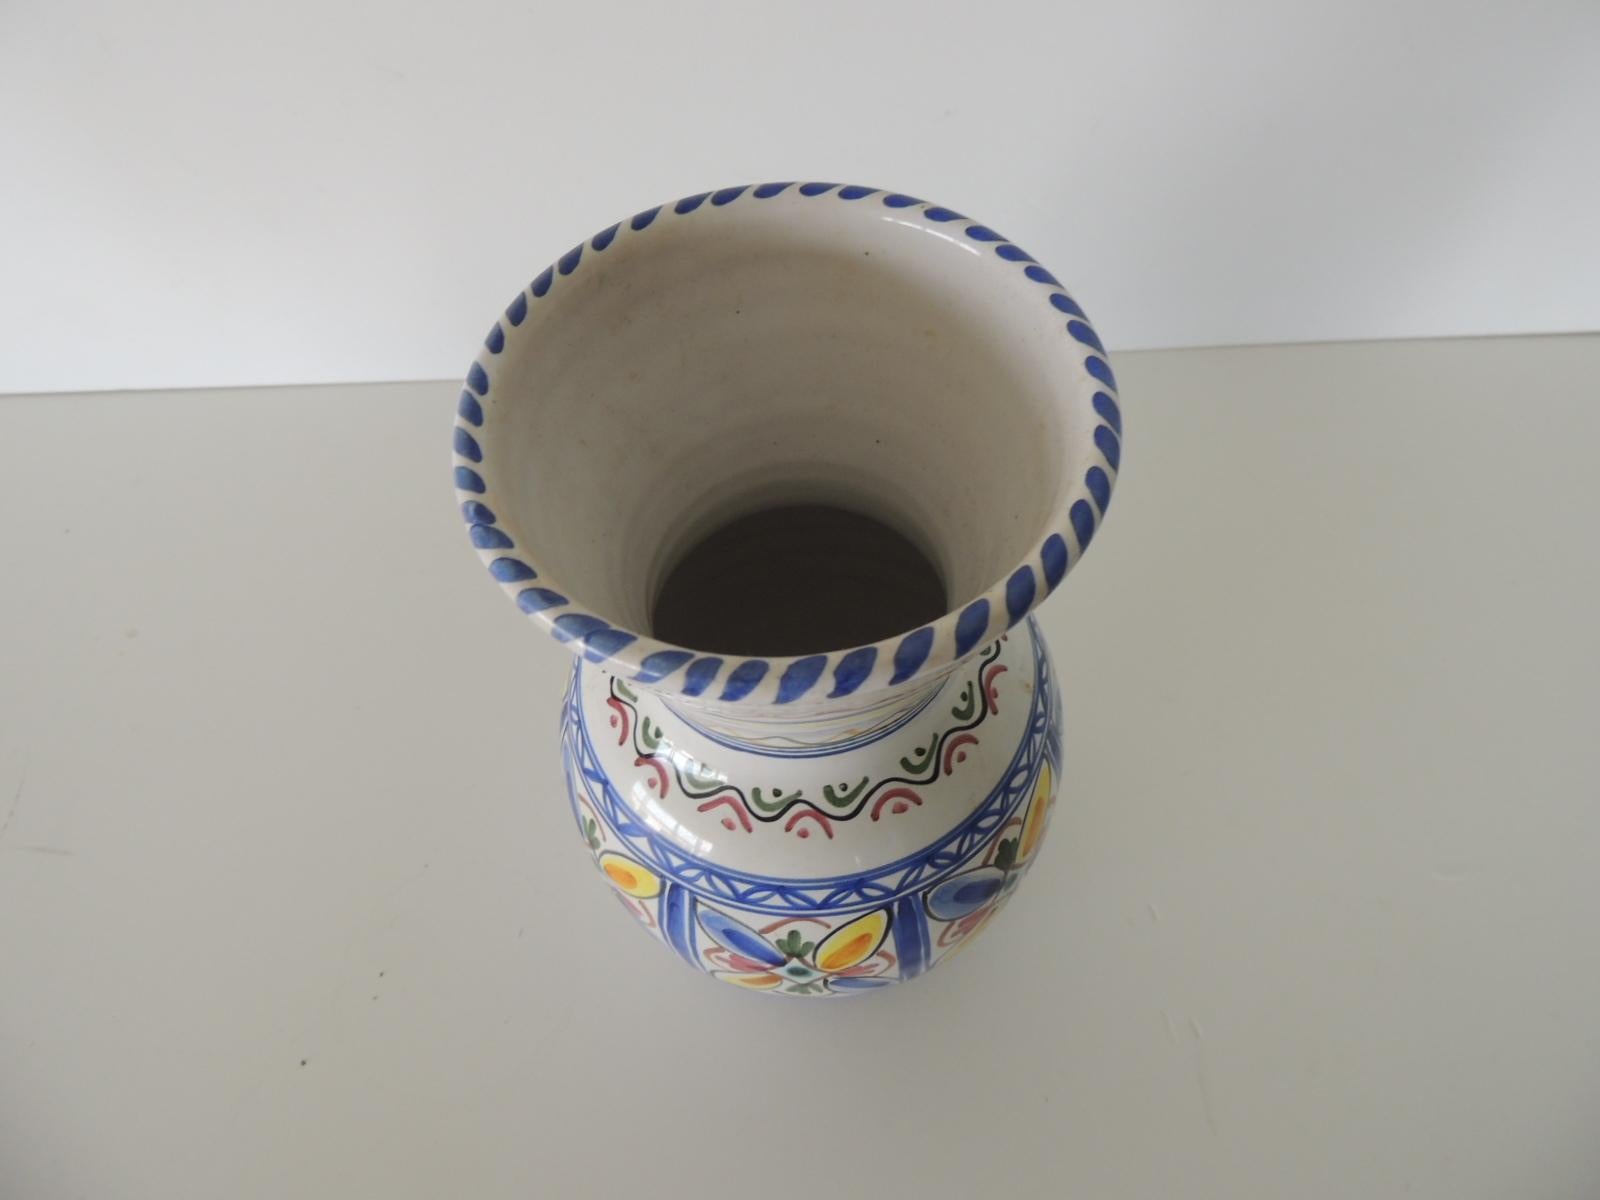 Hand painted round Spanish ceramic decorative vase
De la barreira puente pottery.
In shades of blue, white, yellow and green.
Size: 5